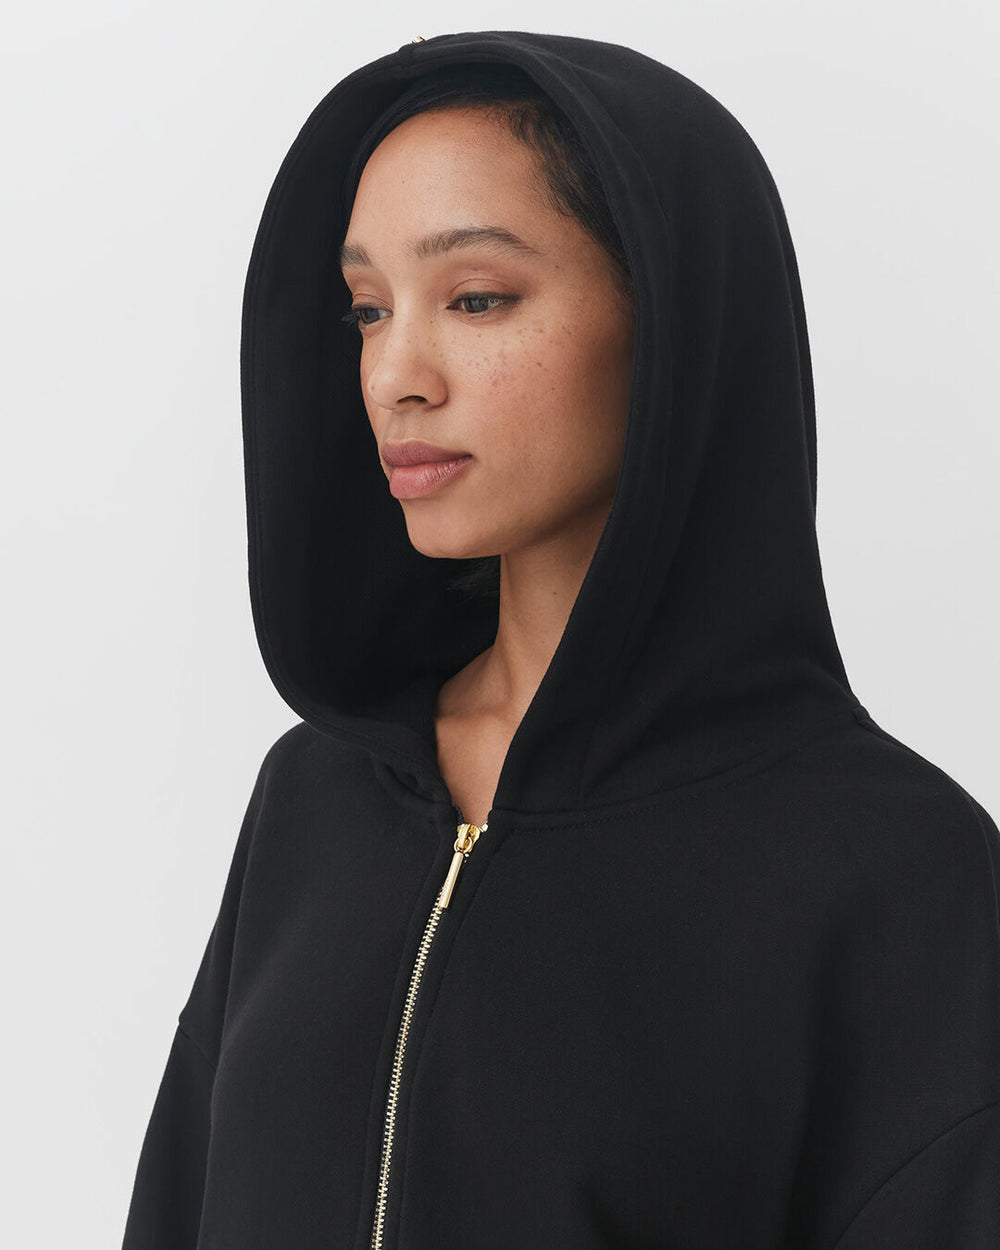 Woman wearing a hooded jacket with a zipper.